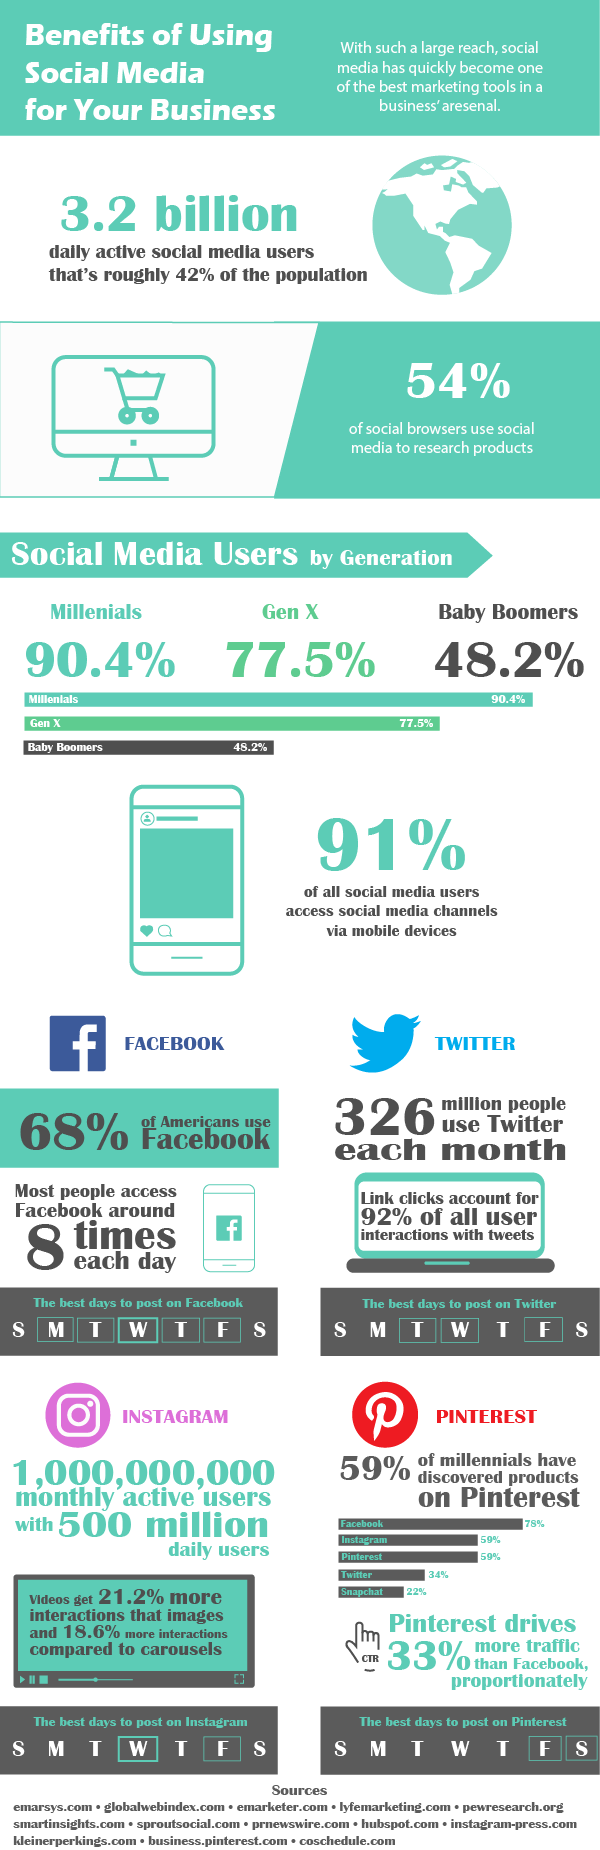 The benefits of social media marketing in your business. This infographic shows statistics about social media users and how brands use social media marketing to leverage their reach.